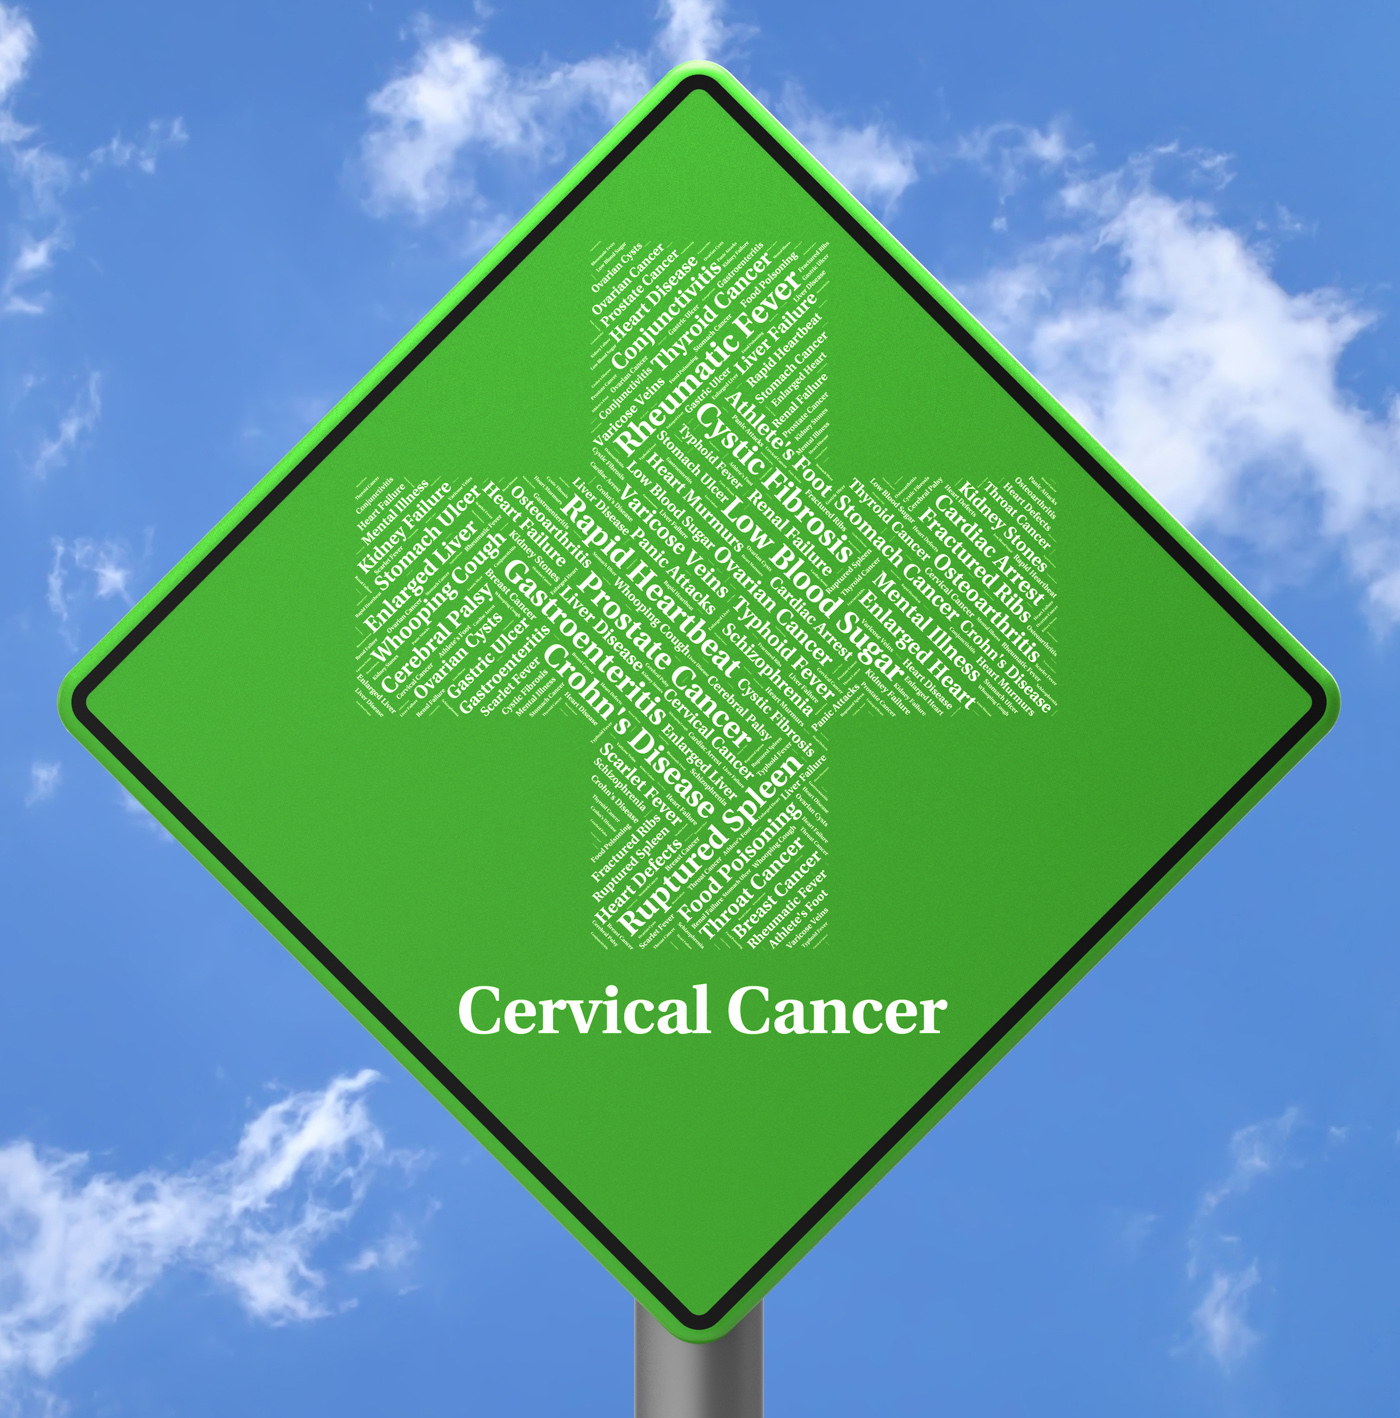 Cervical cancer means poor health and ailments photo